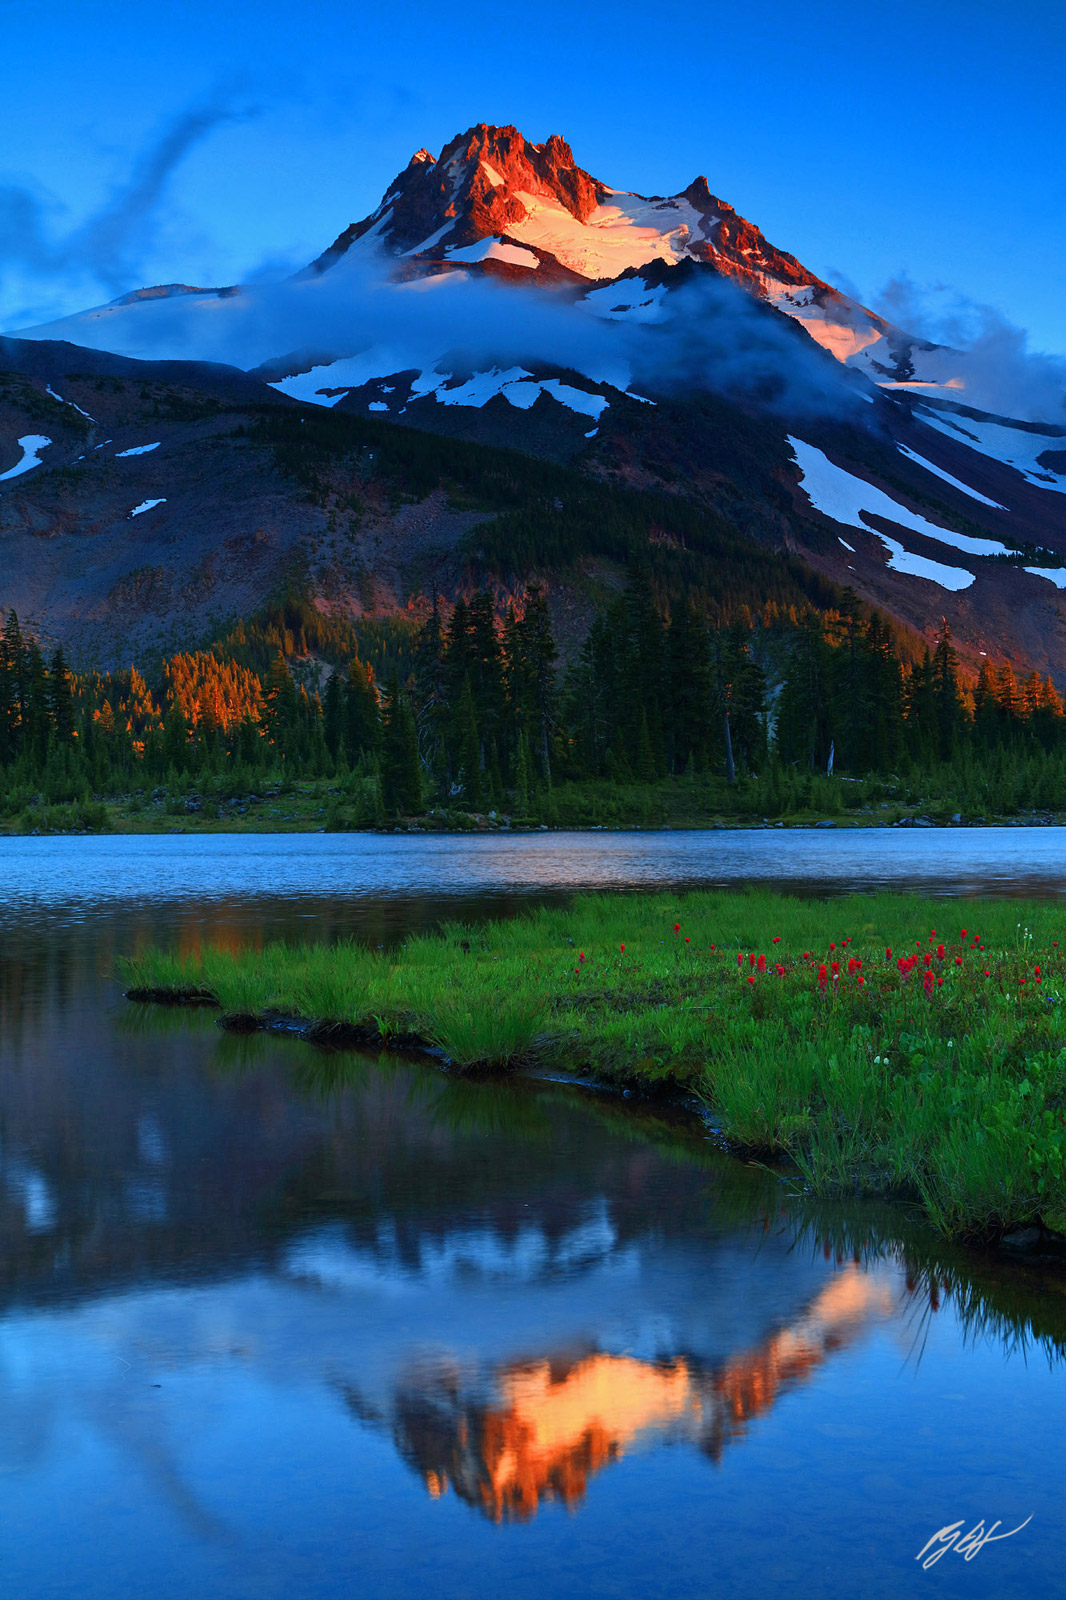 Sunset Mt Jefferson Reflected in Russell Lake in Jefferson Park, Mt Jefferson Wilderness in Oregon